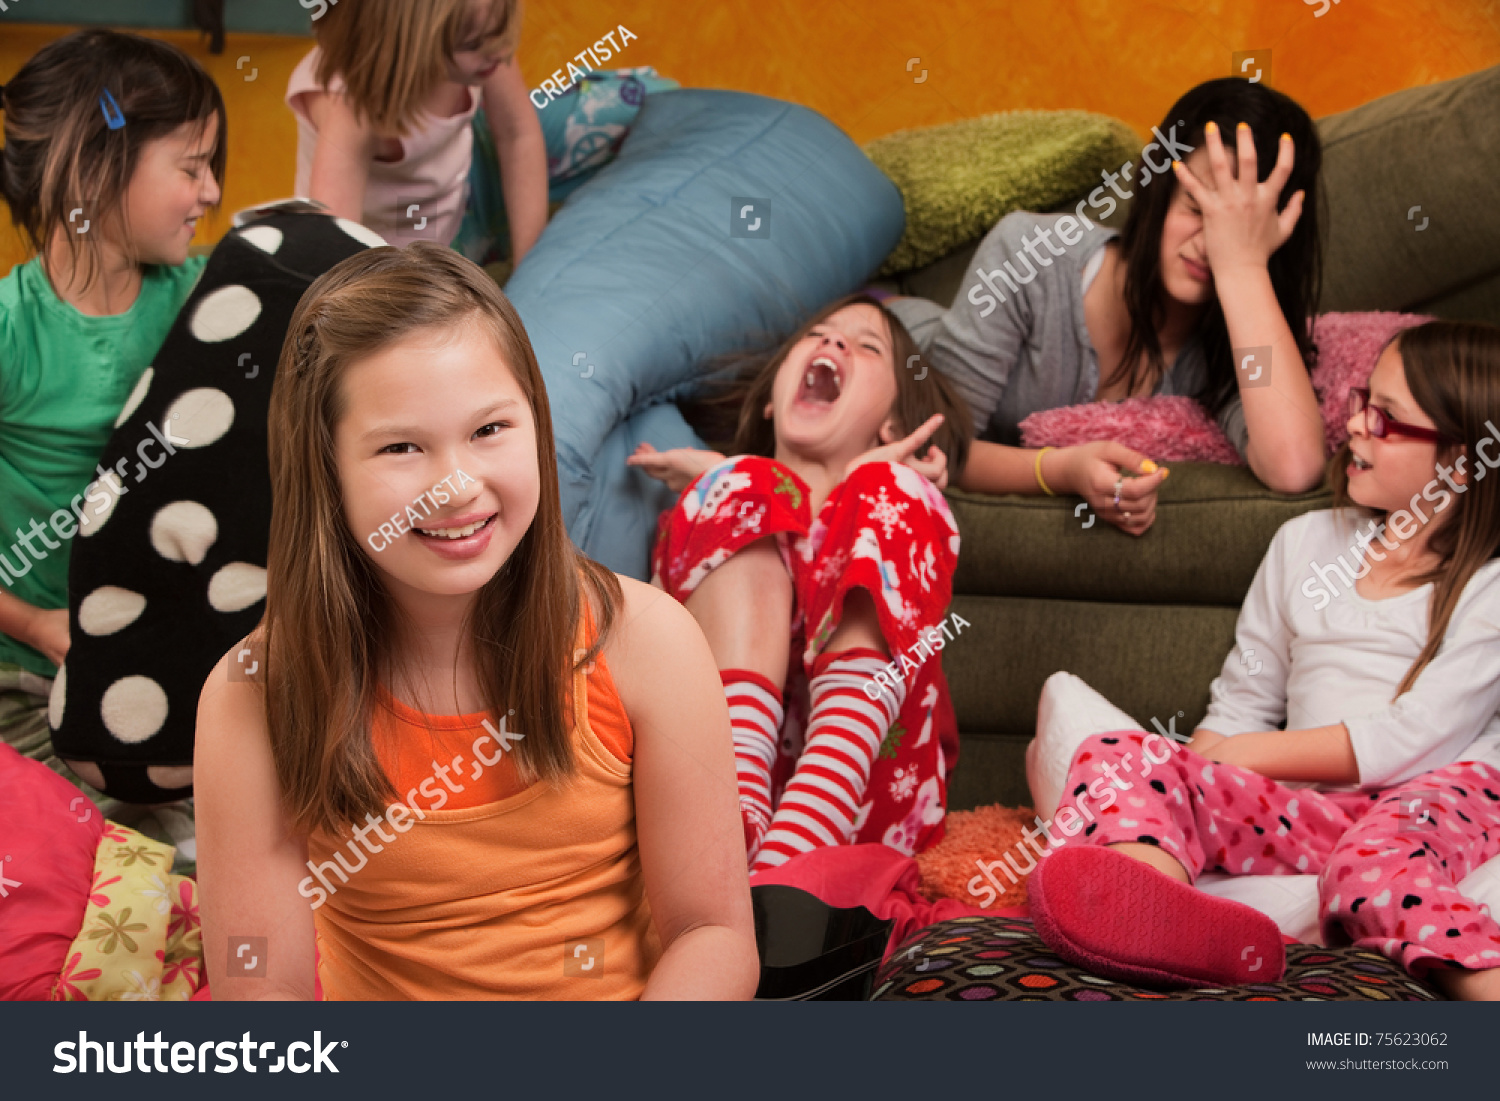 Girls Having A Sleepover High-Res Stock Photo - Getty Images